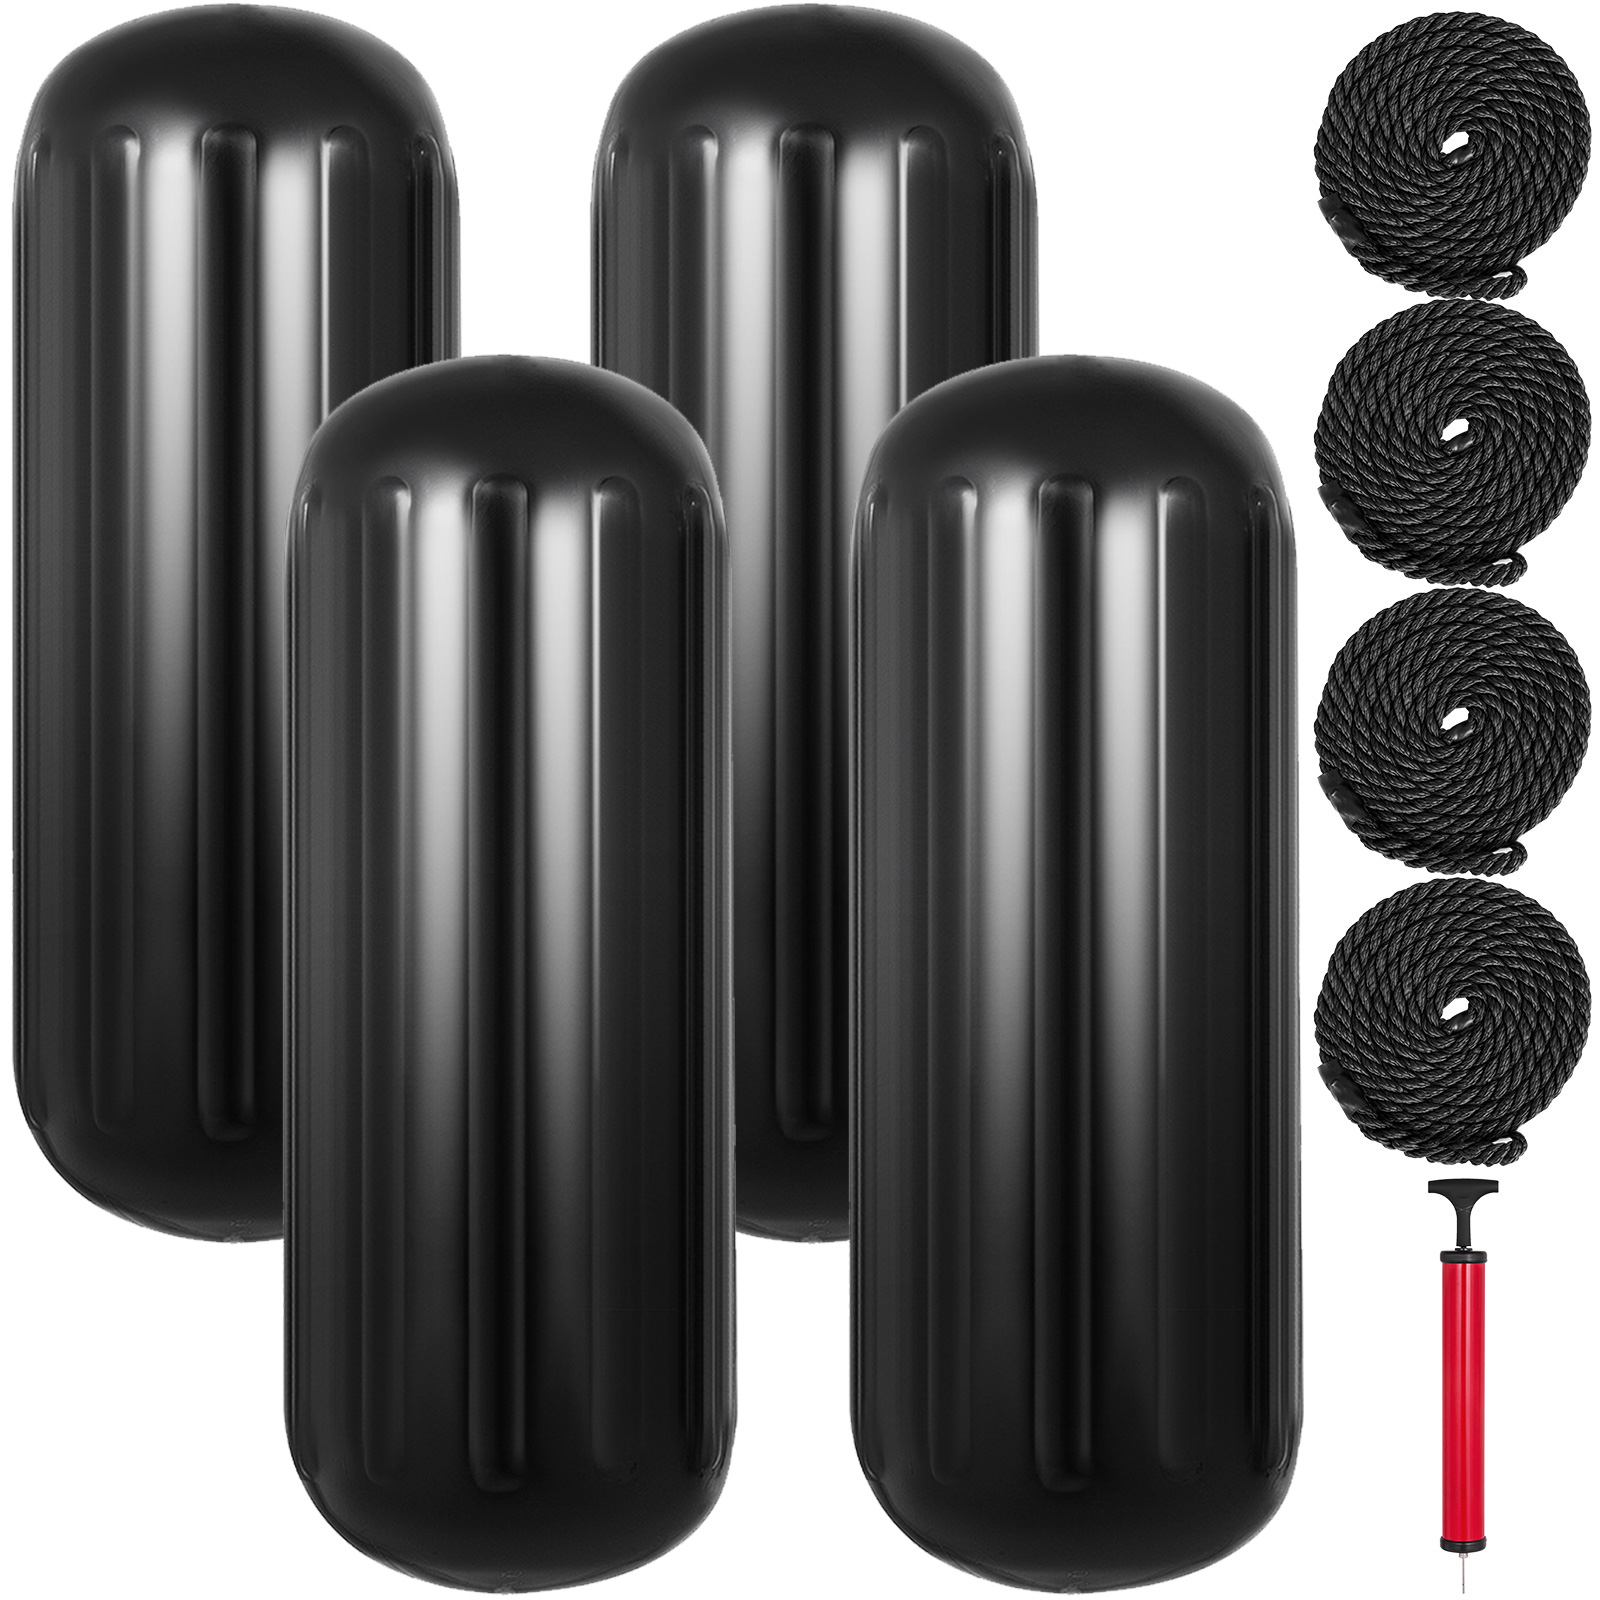 4 New Ribbed Boat Fenders 10" X 28" Black Center Hole Bumpers Mooring Protection от Vevor Many GEOs